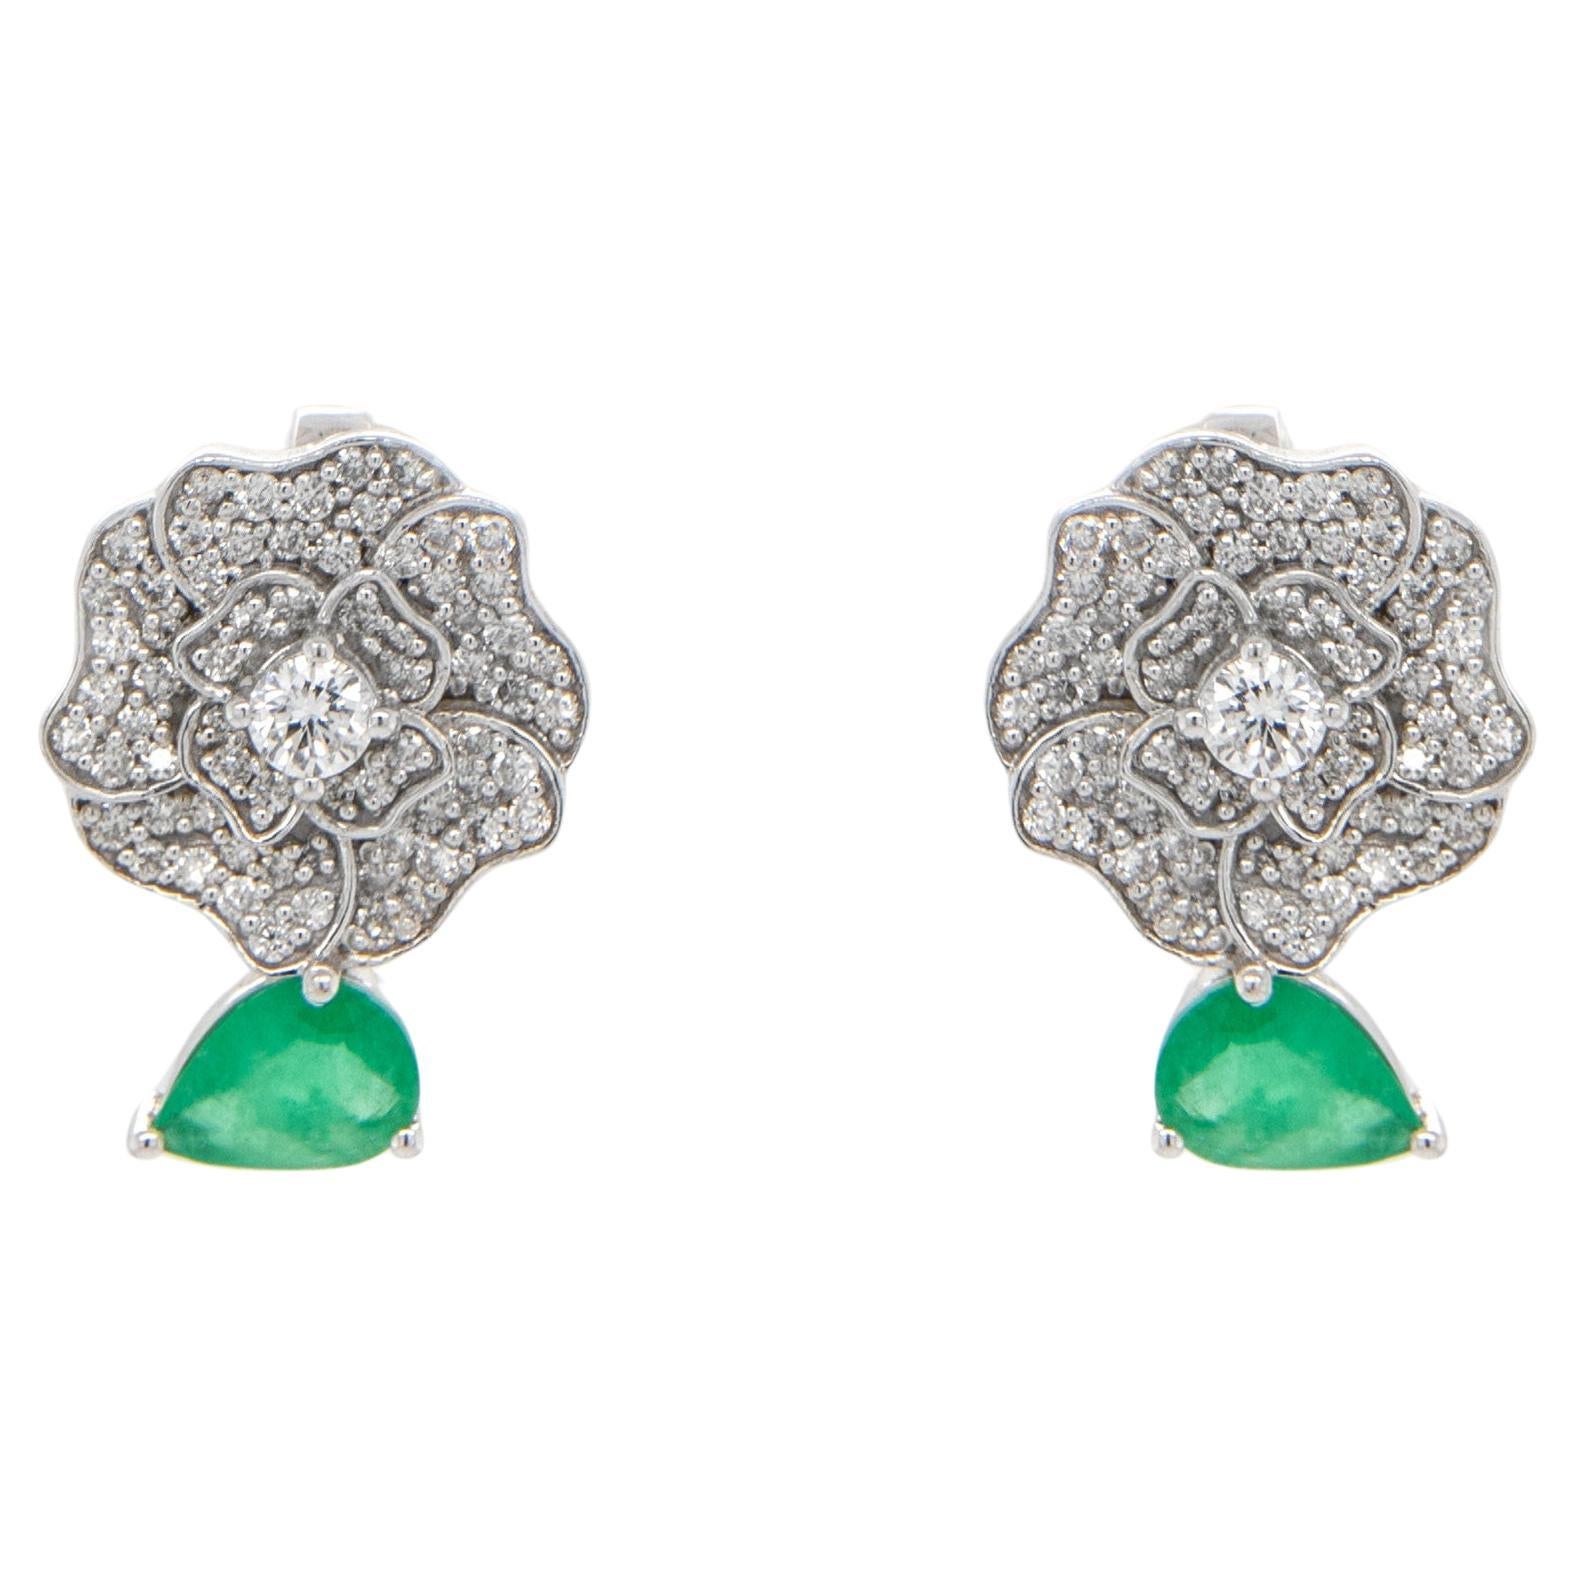 Emerald and Diamond Dangle Earrings 2.3 Carats Total 18k White Gold